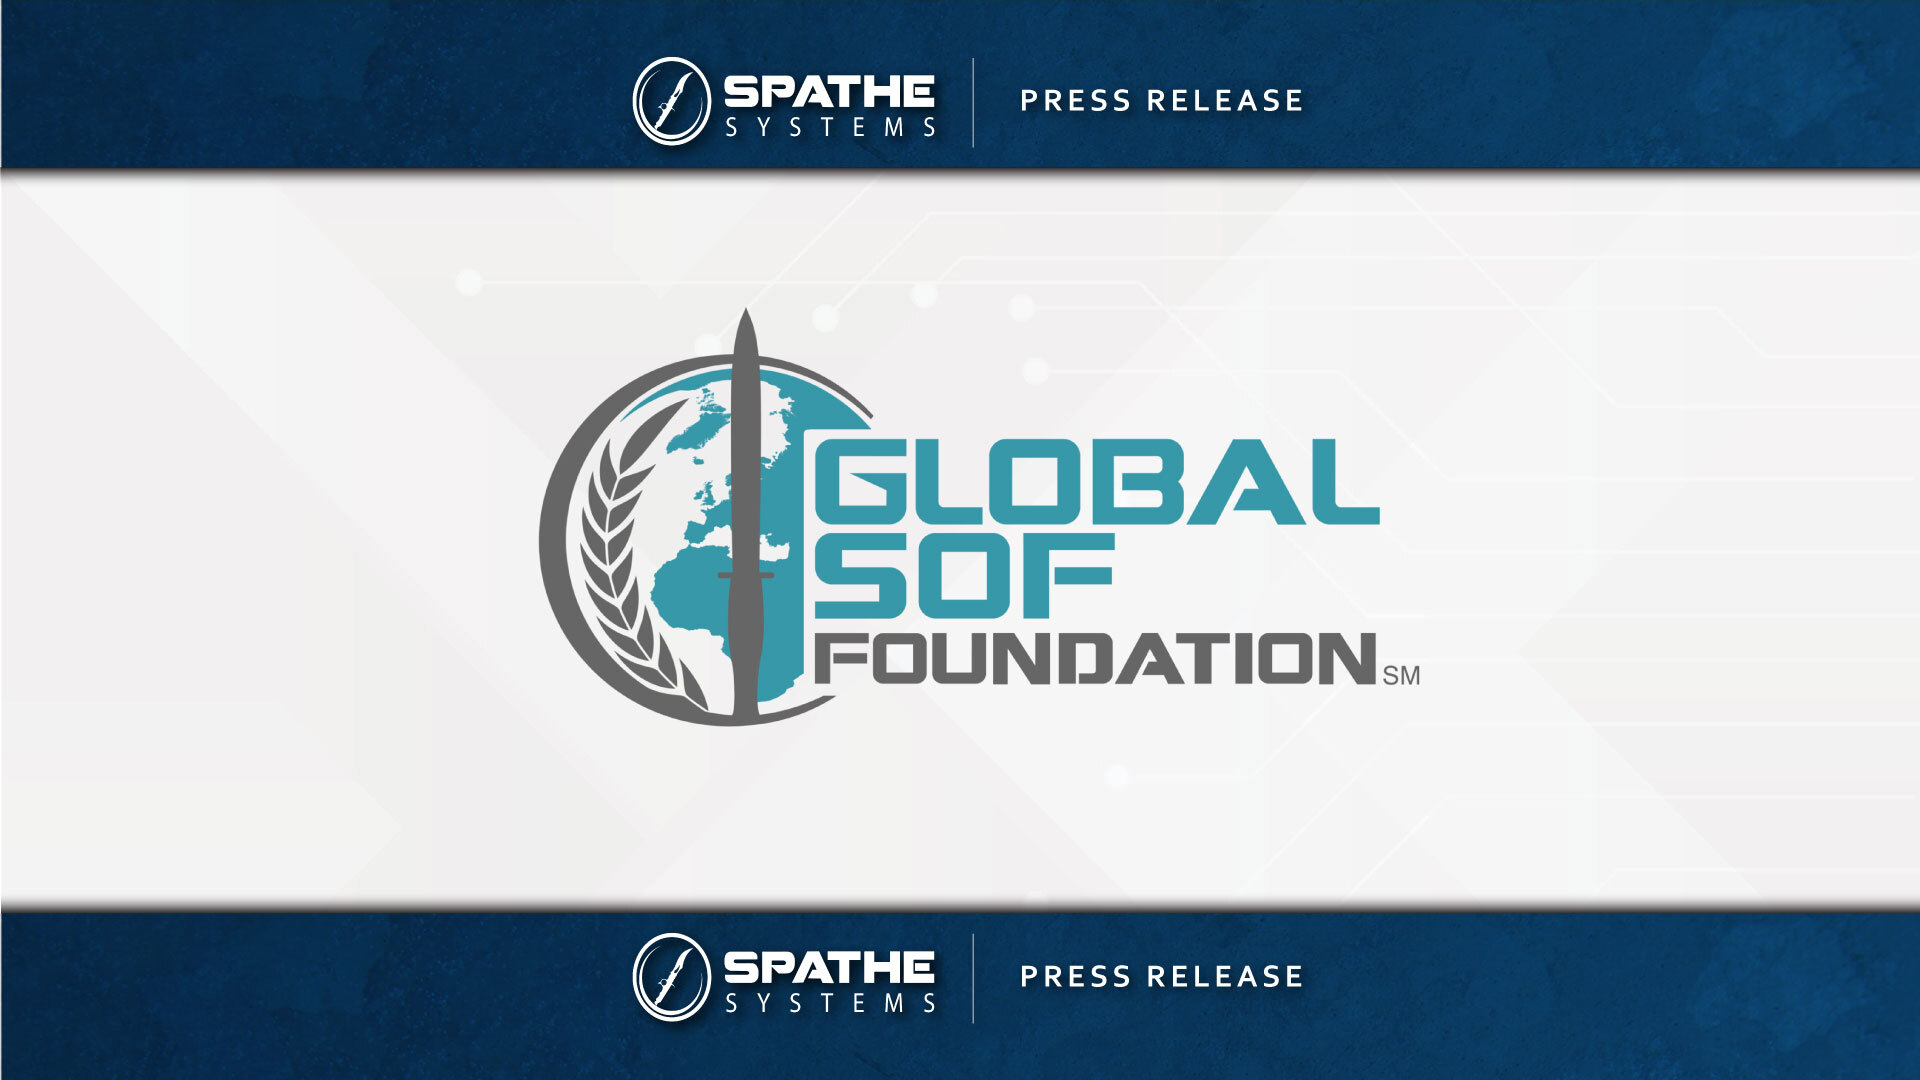 Spathe Systems Joins the Global SOF Foundation (GSF)